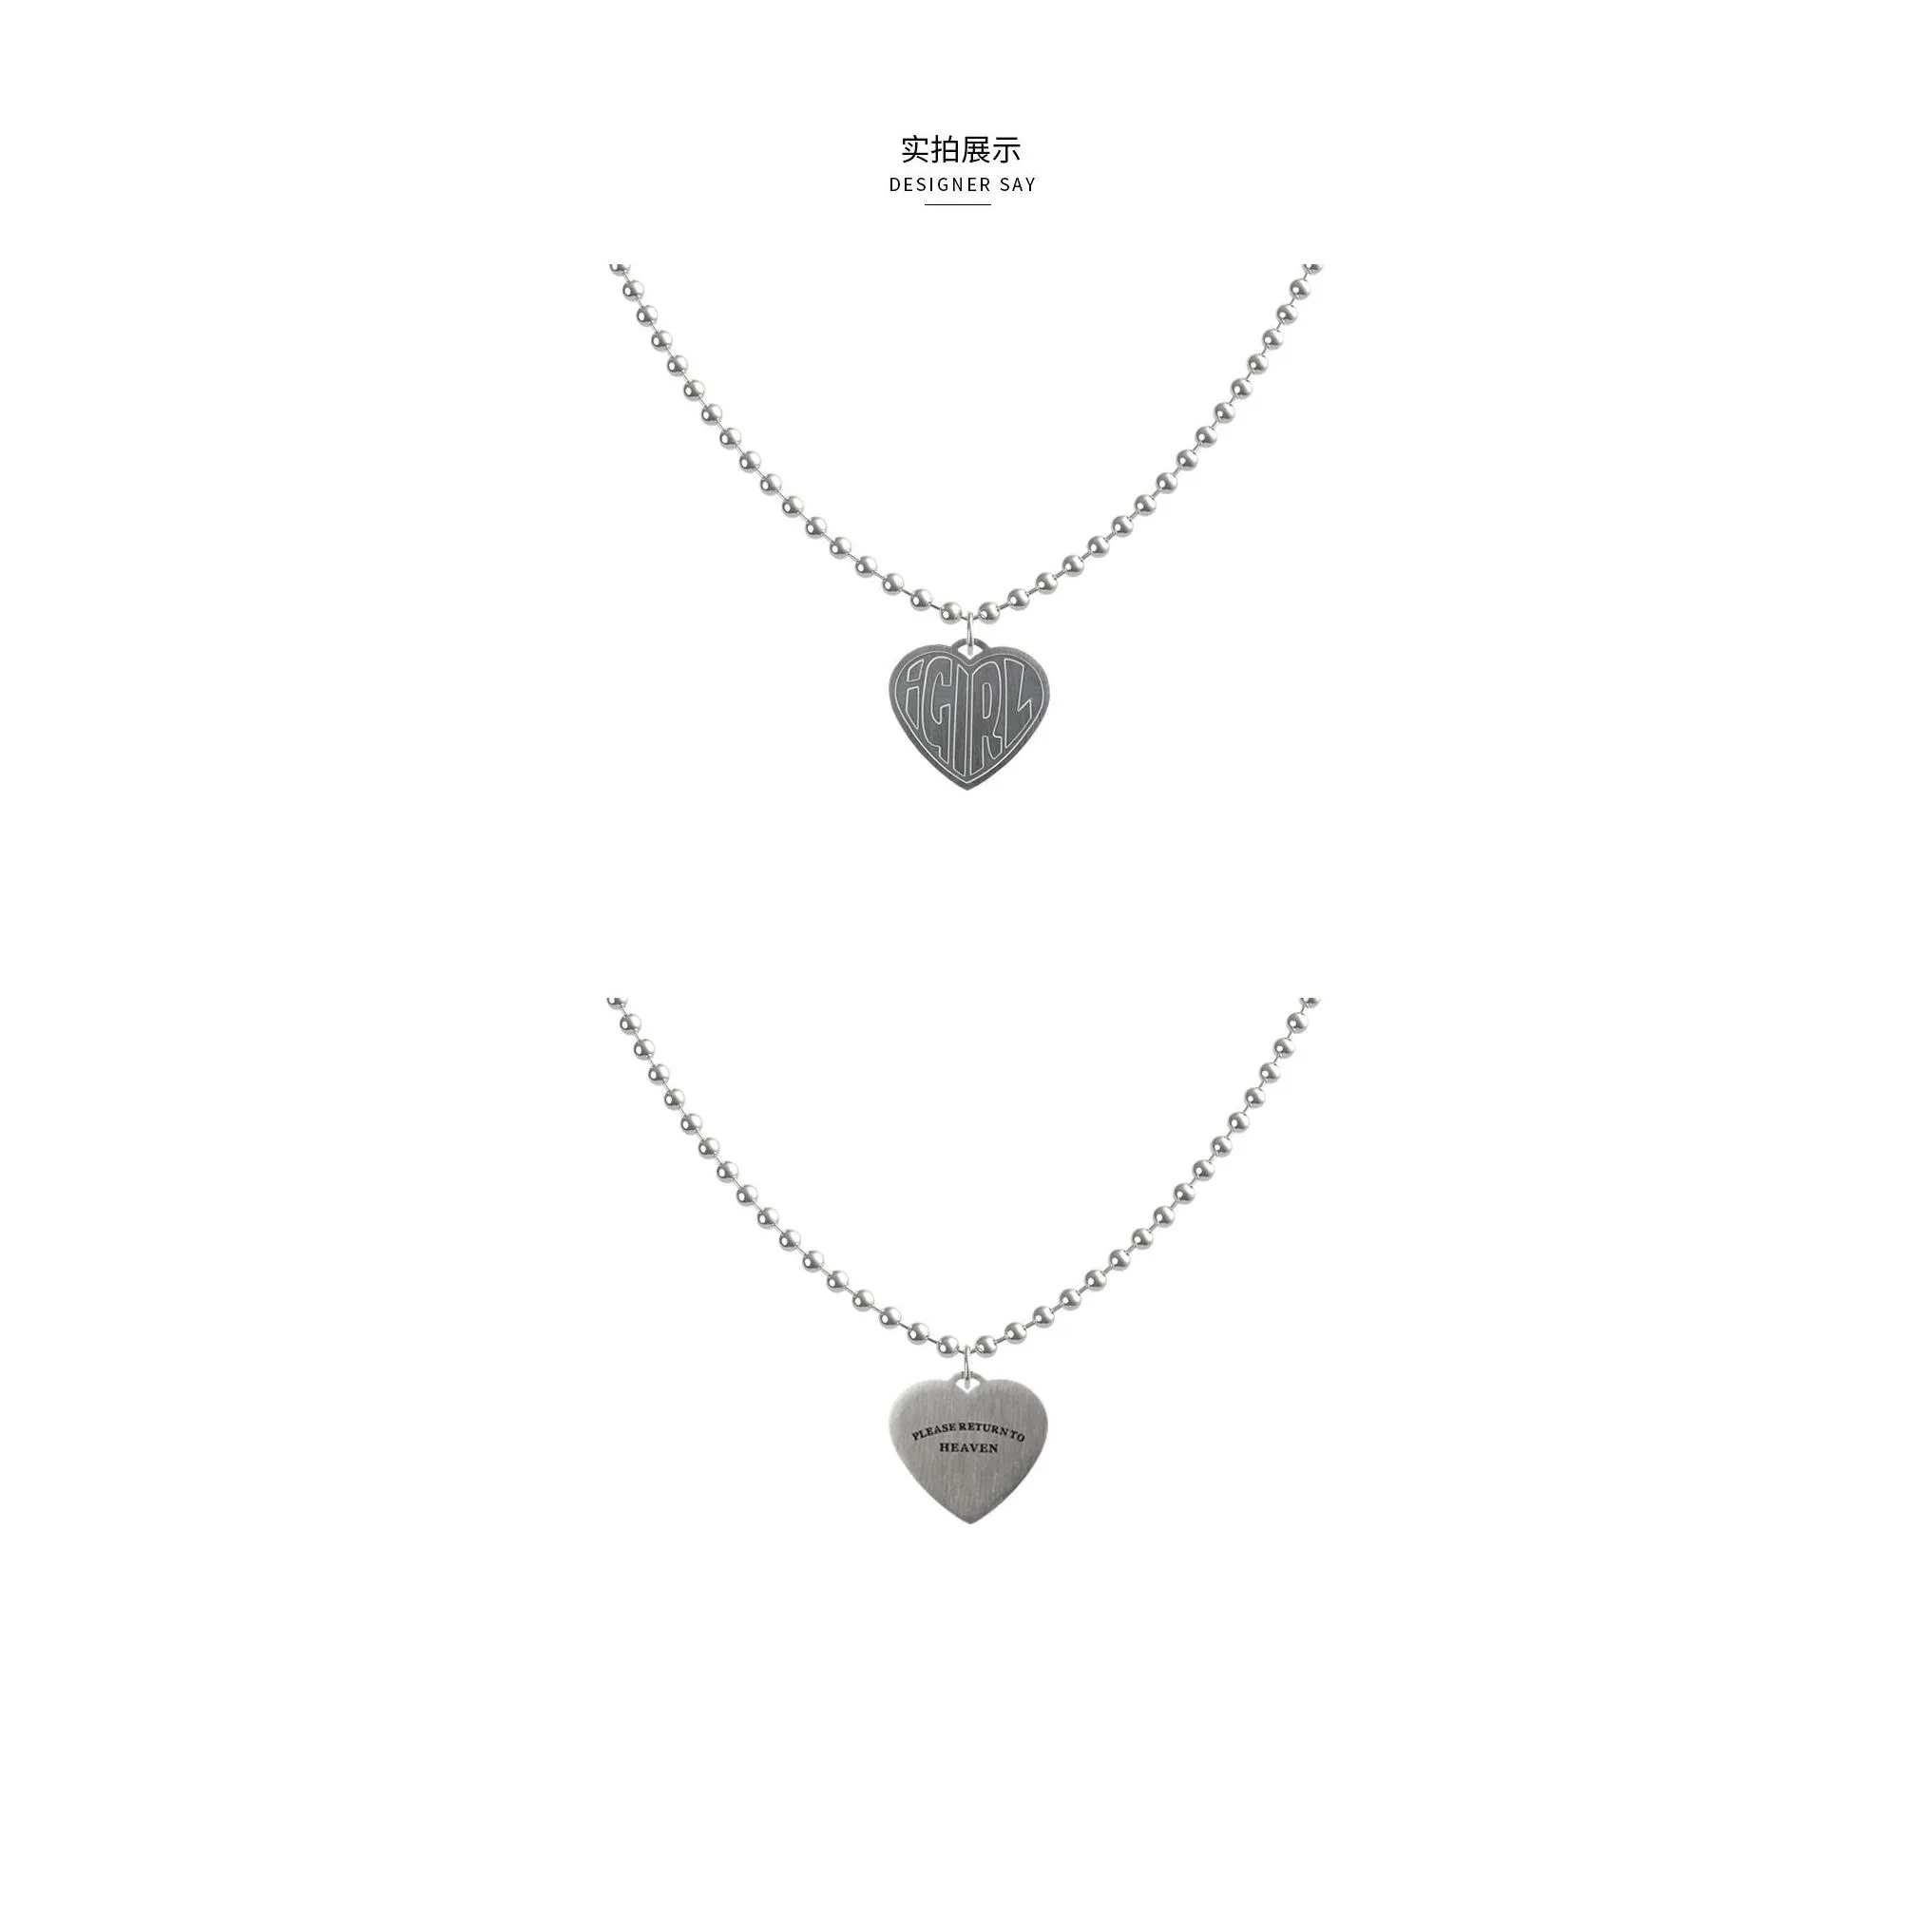 Pendant Necklaces Fashion Igirl Letter Heart Necklaces For Women Stainless Steel Strand Chain Necklace Cool Girls Gift Punk Collier Je Dhpmw